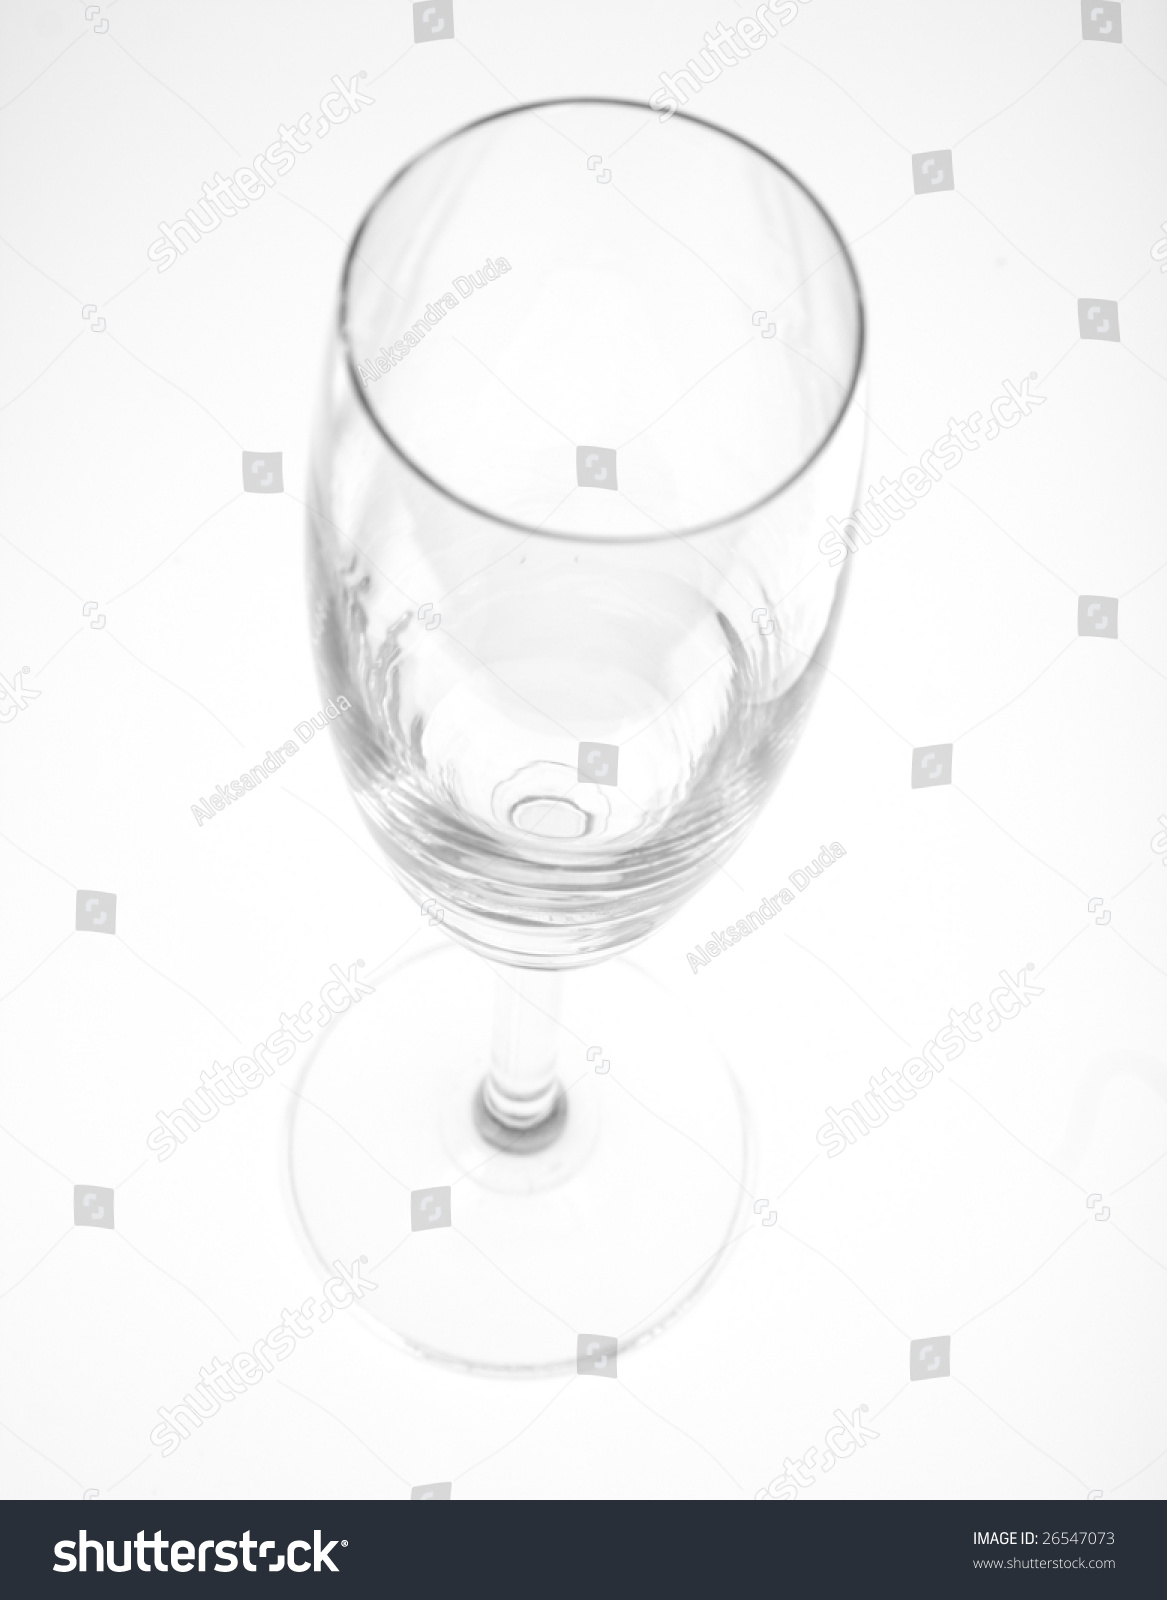 An empty wine glass isolated on white background #26547073